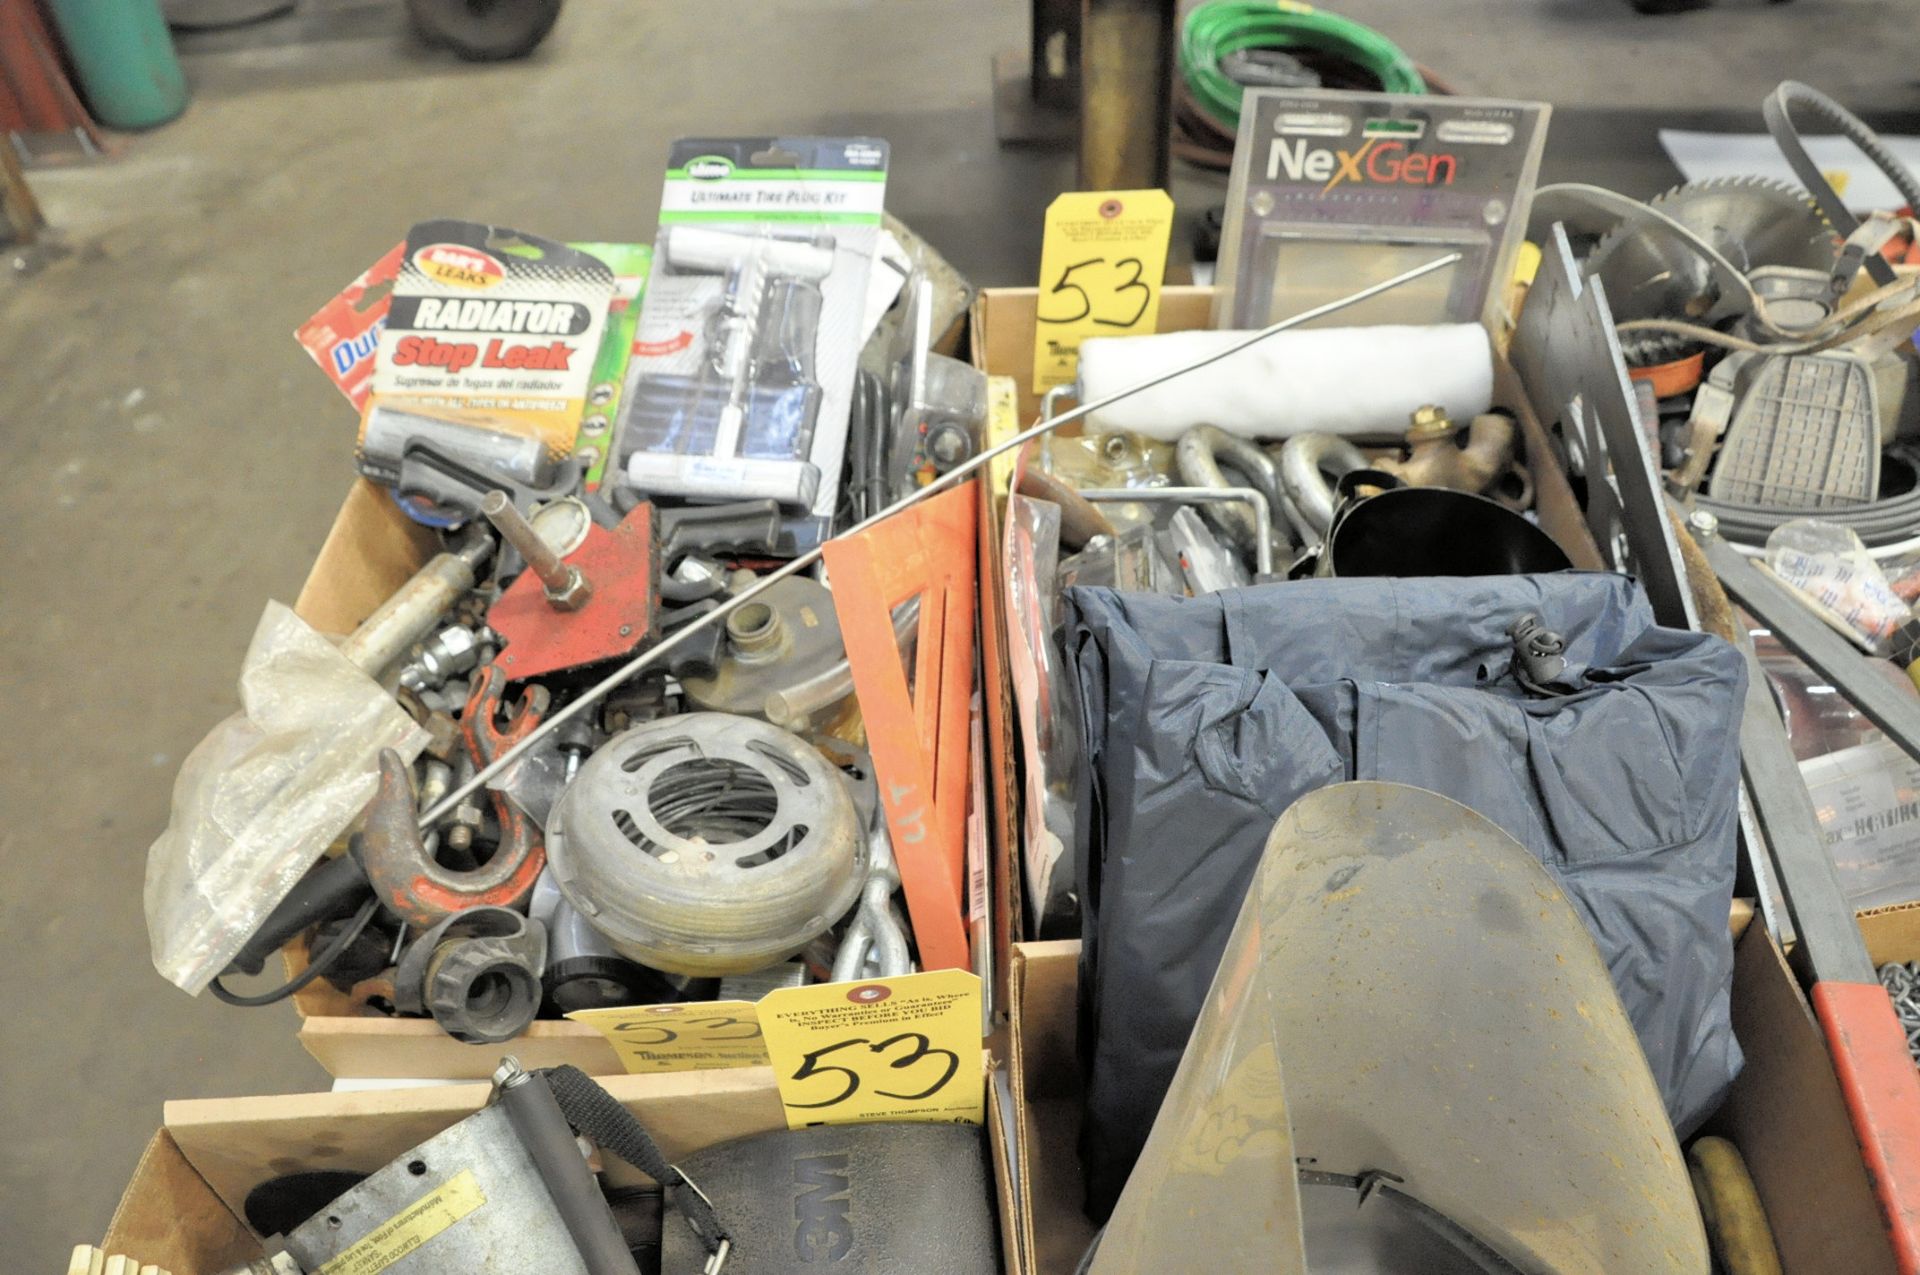 Lot-Tapes, Grinder Handles, Light Bulbs, Saw Blades, Hardware, Chain, etc. in (8) Boxes - Image 2 of 5